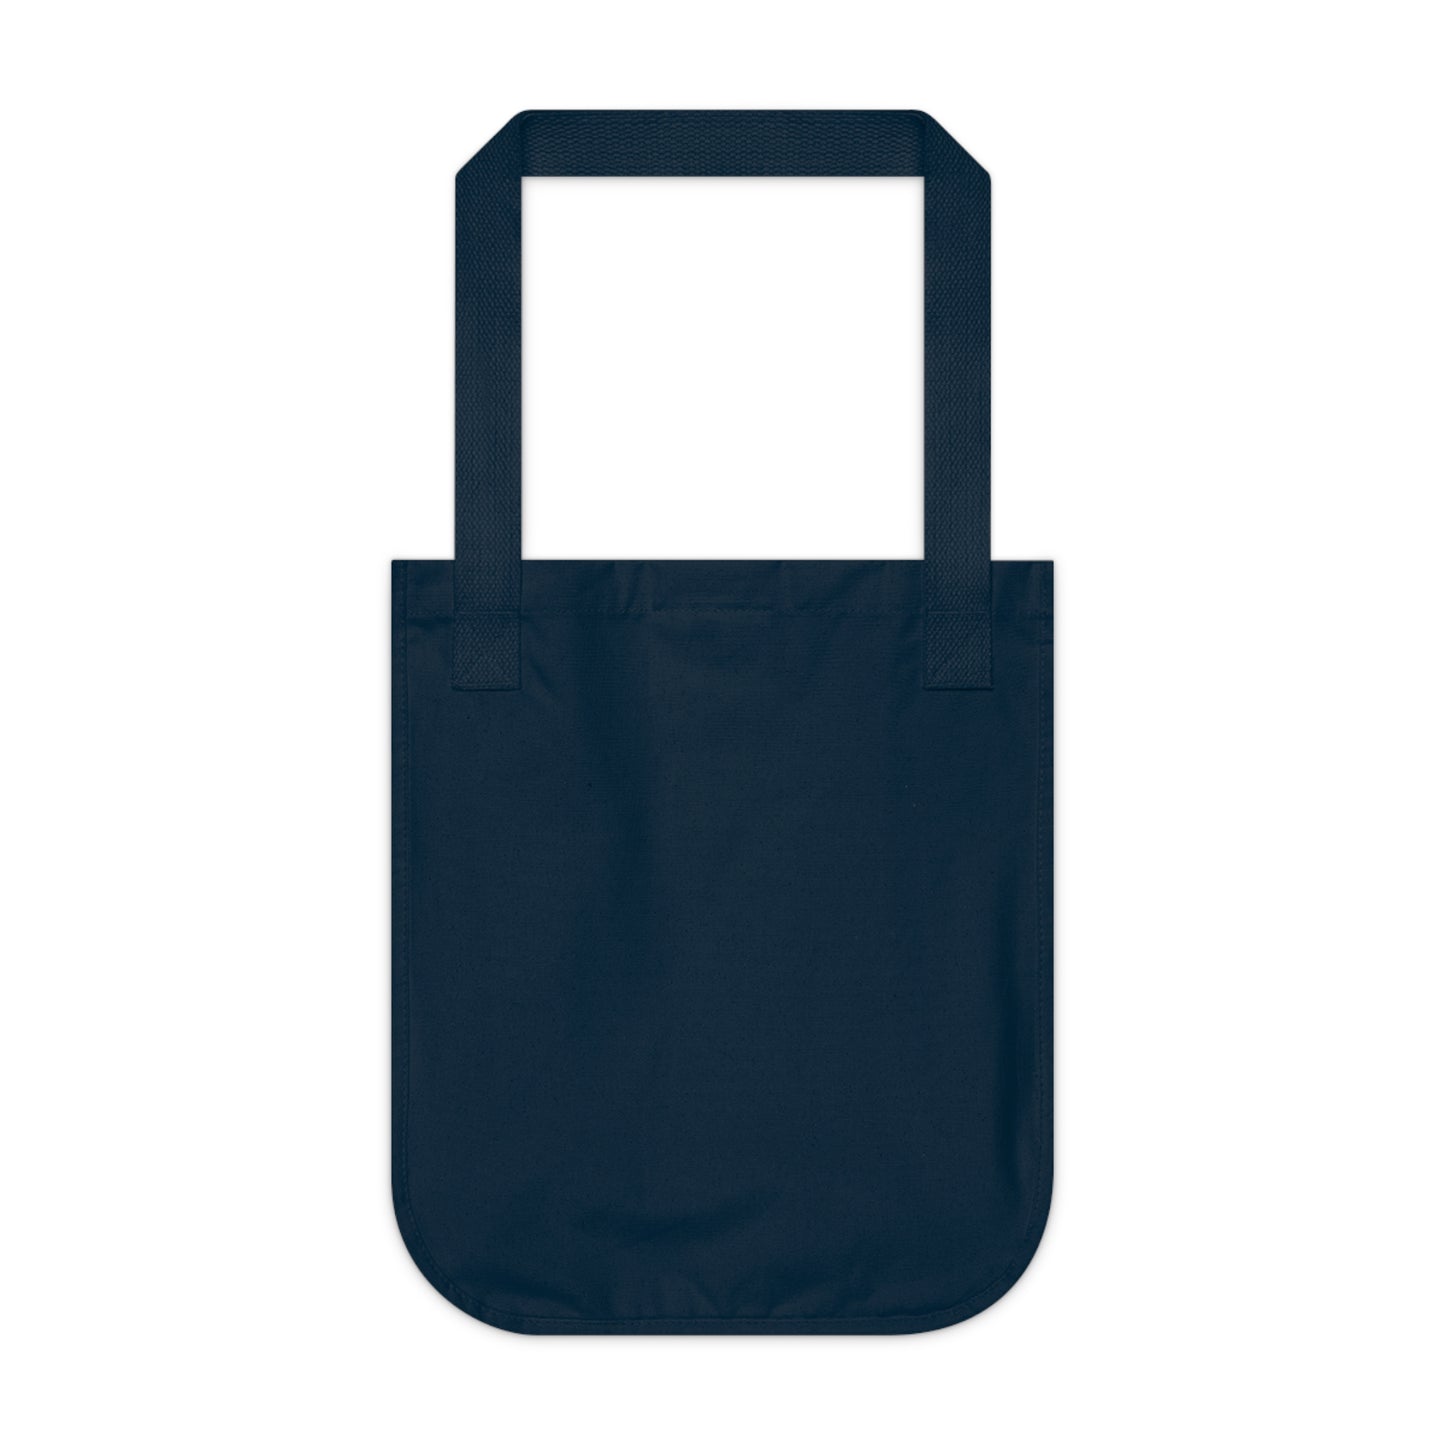 "A Breezy Skyscape: A Combination of Tradition and Modernity" - The Alien Eco-friendly Tote Bag